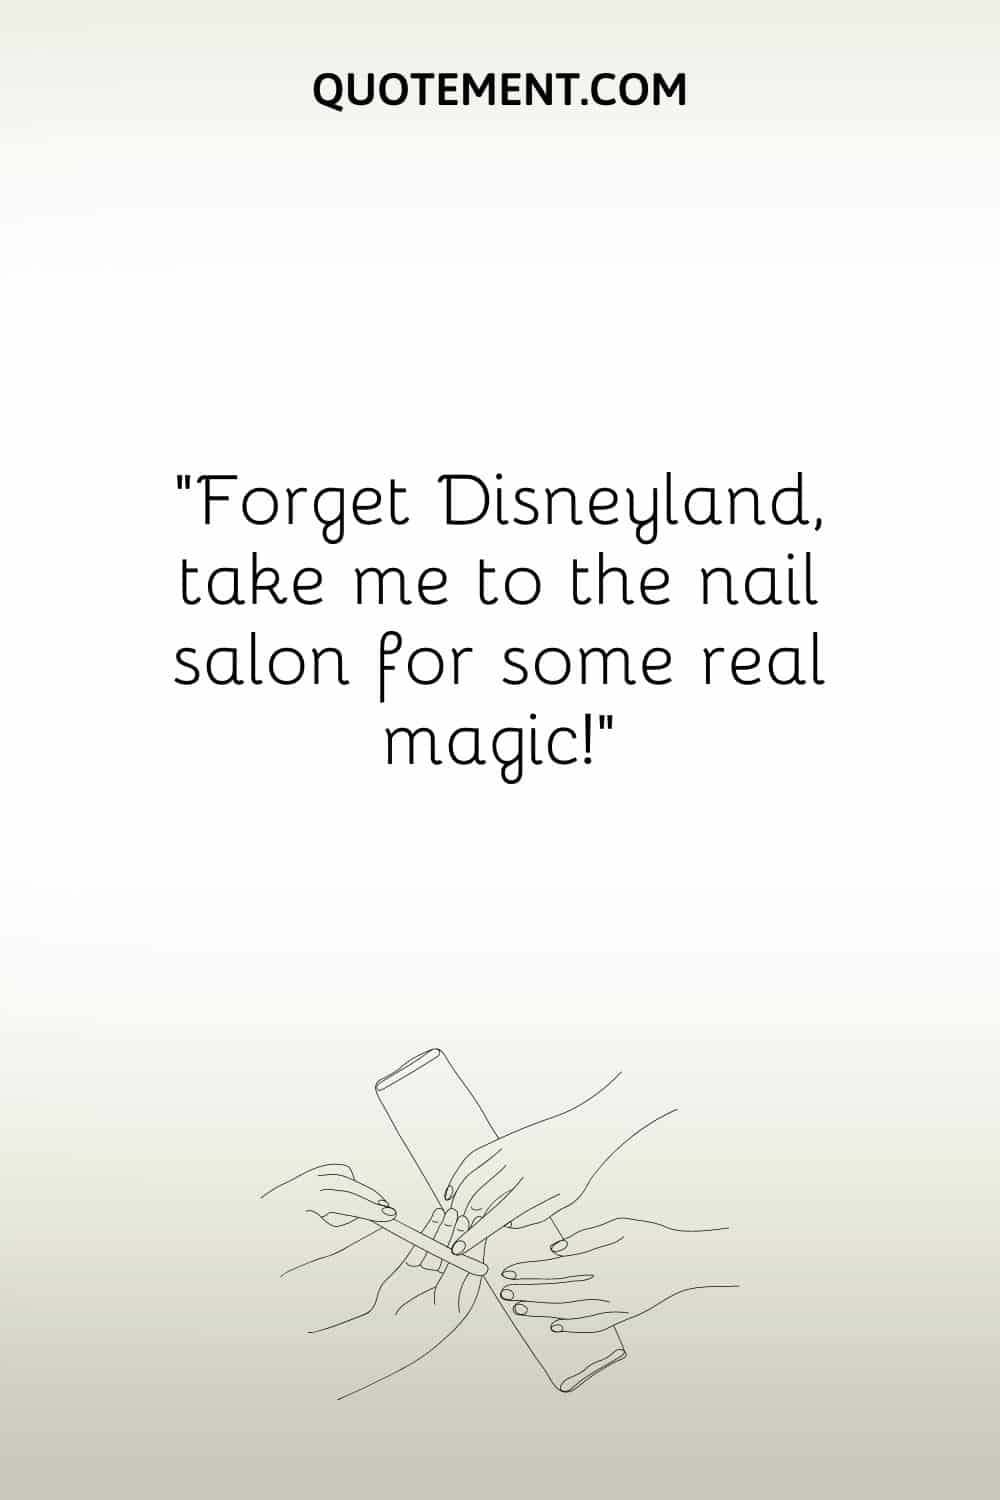 Forget Disneyland, take me to the nail salon for some real magic